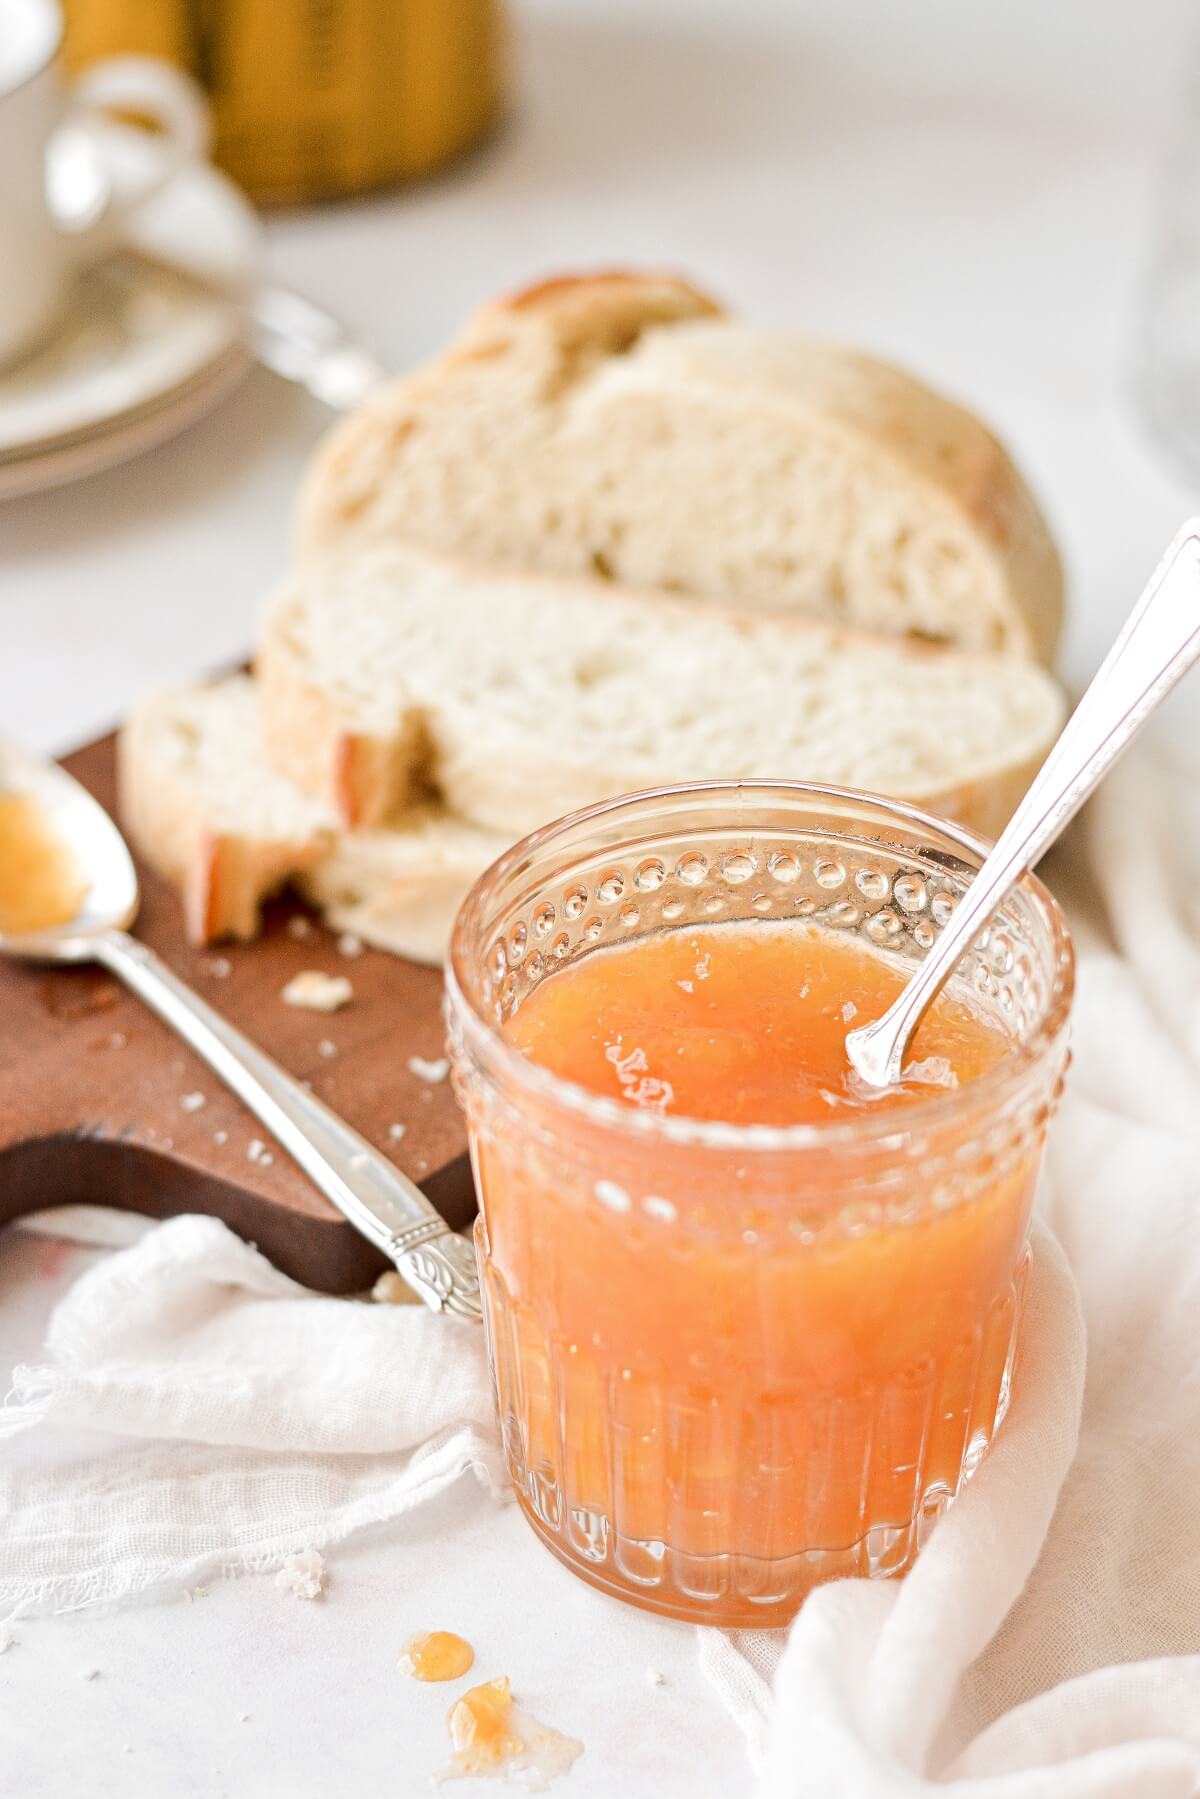 A jar of peach apricot jam, next to a loaf of sliced bread.